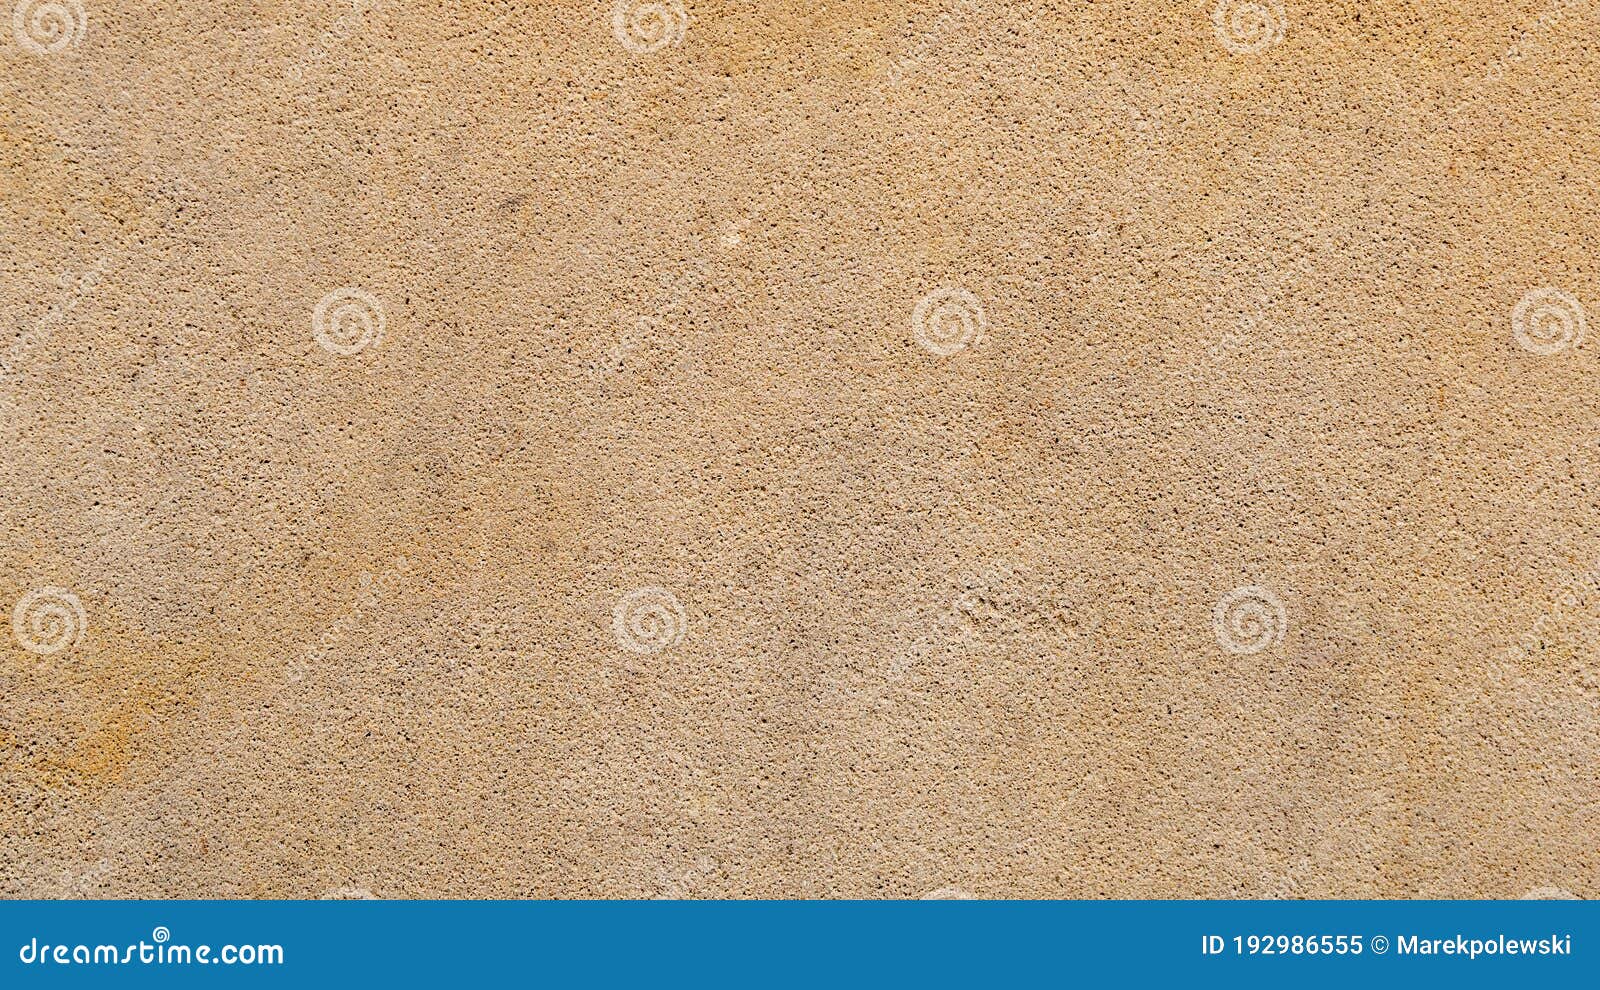 Smooth sandstone texture stock image. Image of sand - 192986555